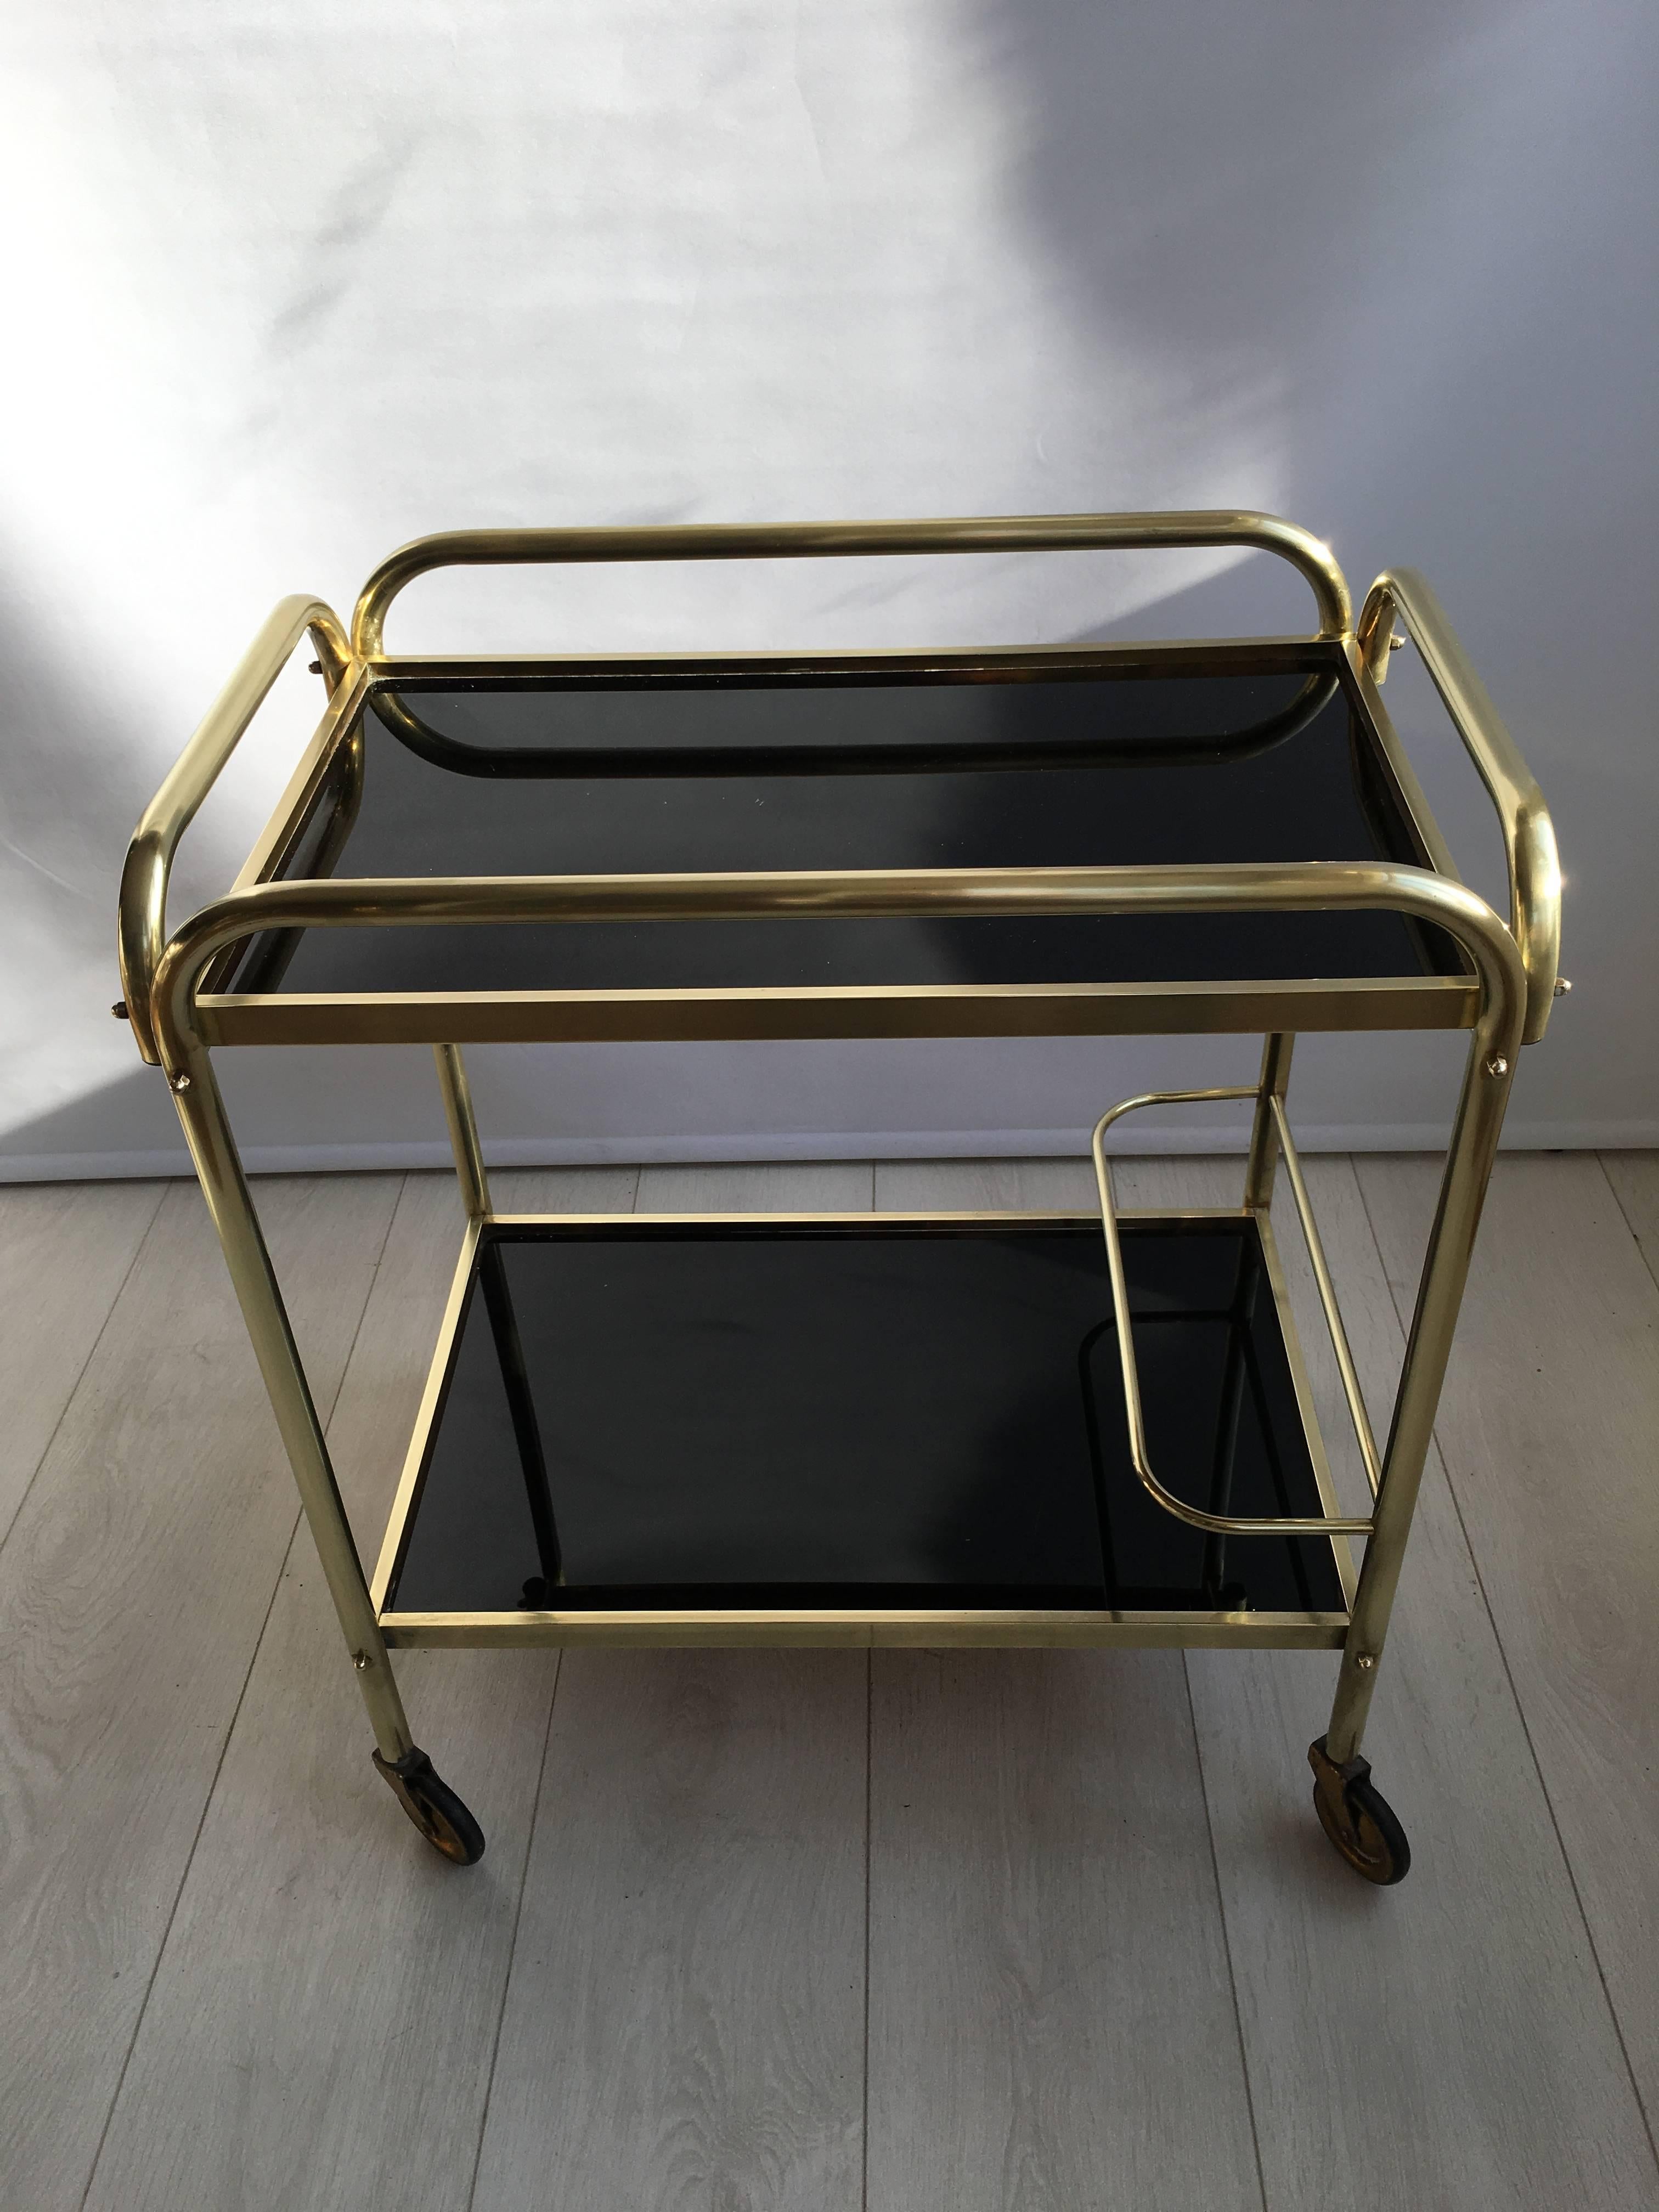 Great looking vintage drinks trolley with lift off top tray

Black melamine top, some minor scratches (please see close up image)

Measures 56.5 cm wide, 37cm deep and 62.5cm tall

   